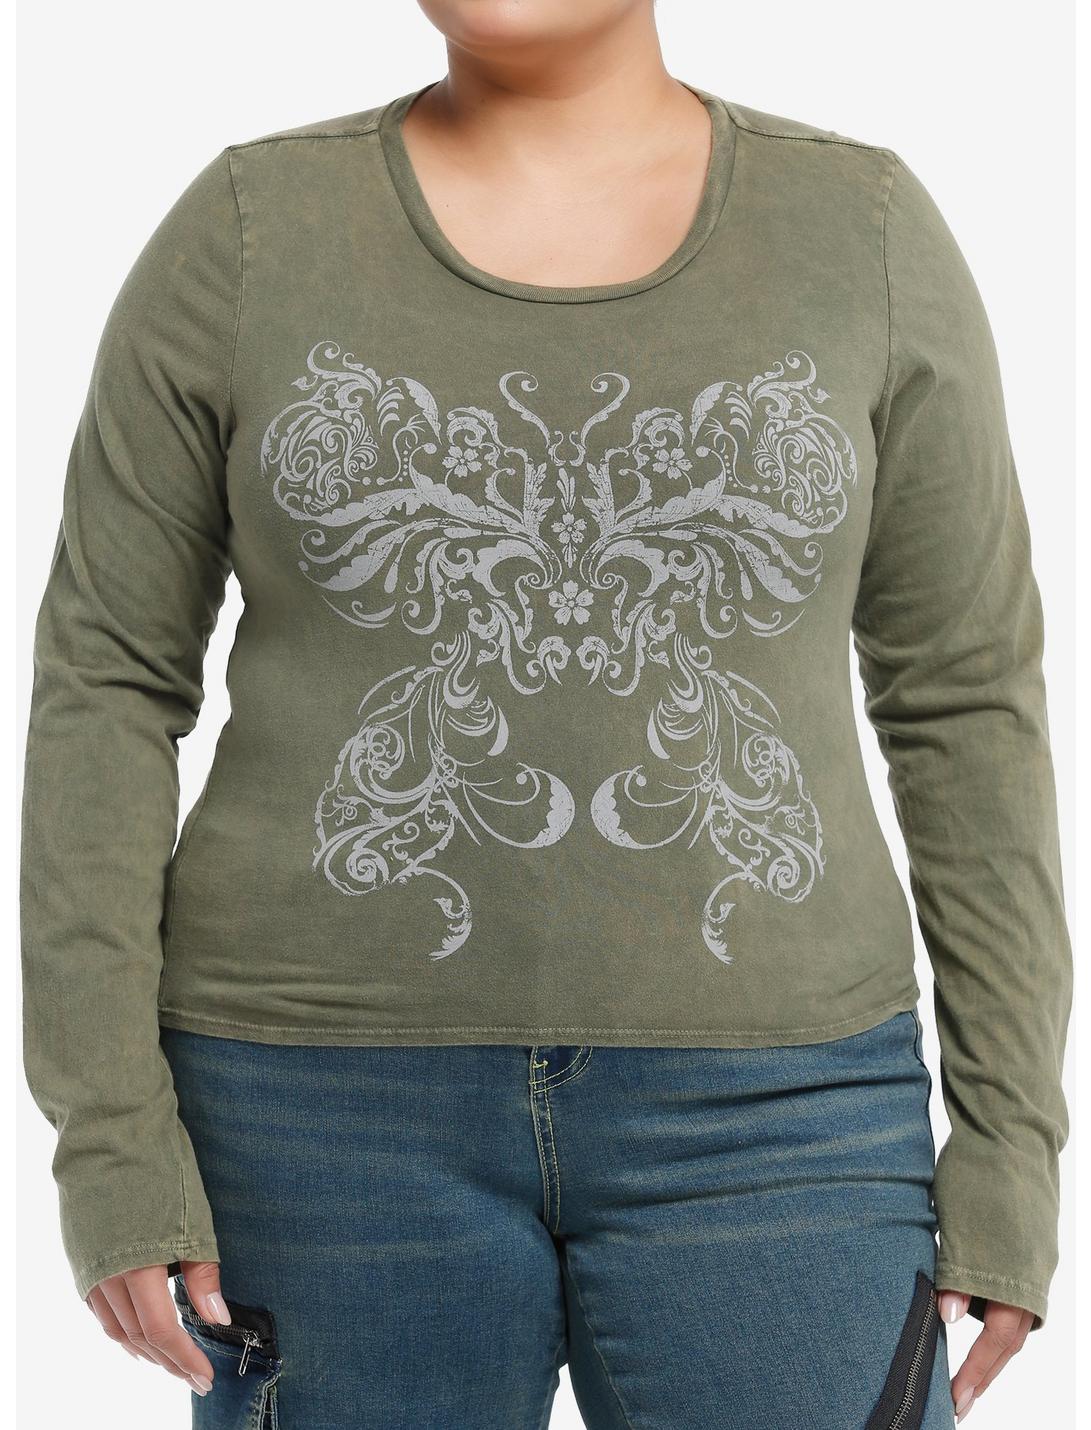 Social Collision Filigree Butterfly Girls Long-Sleeve T-Shirt Plus Size, , hi-res